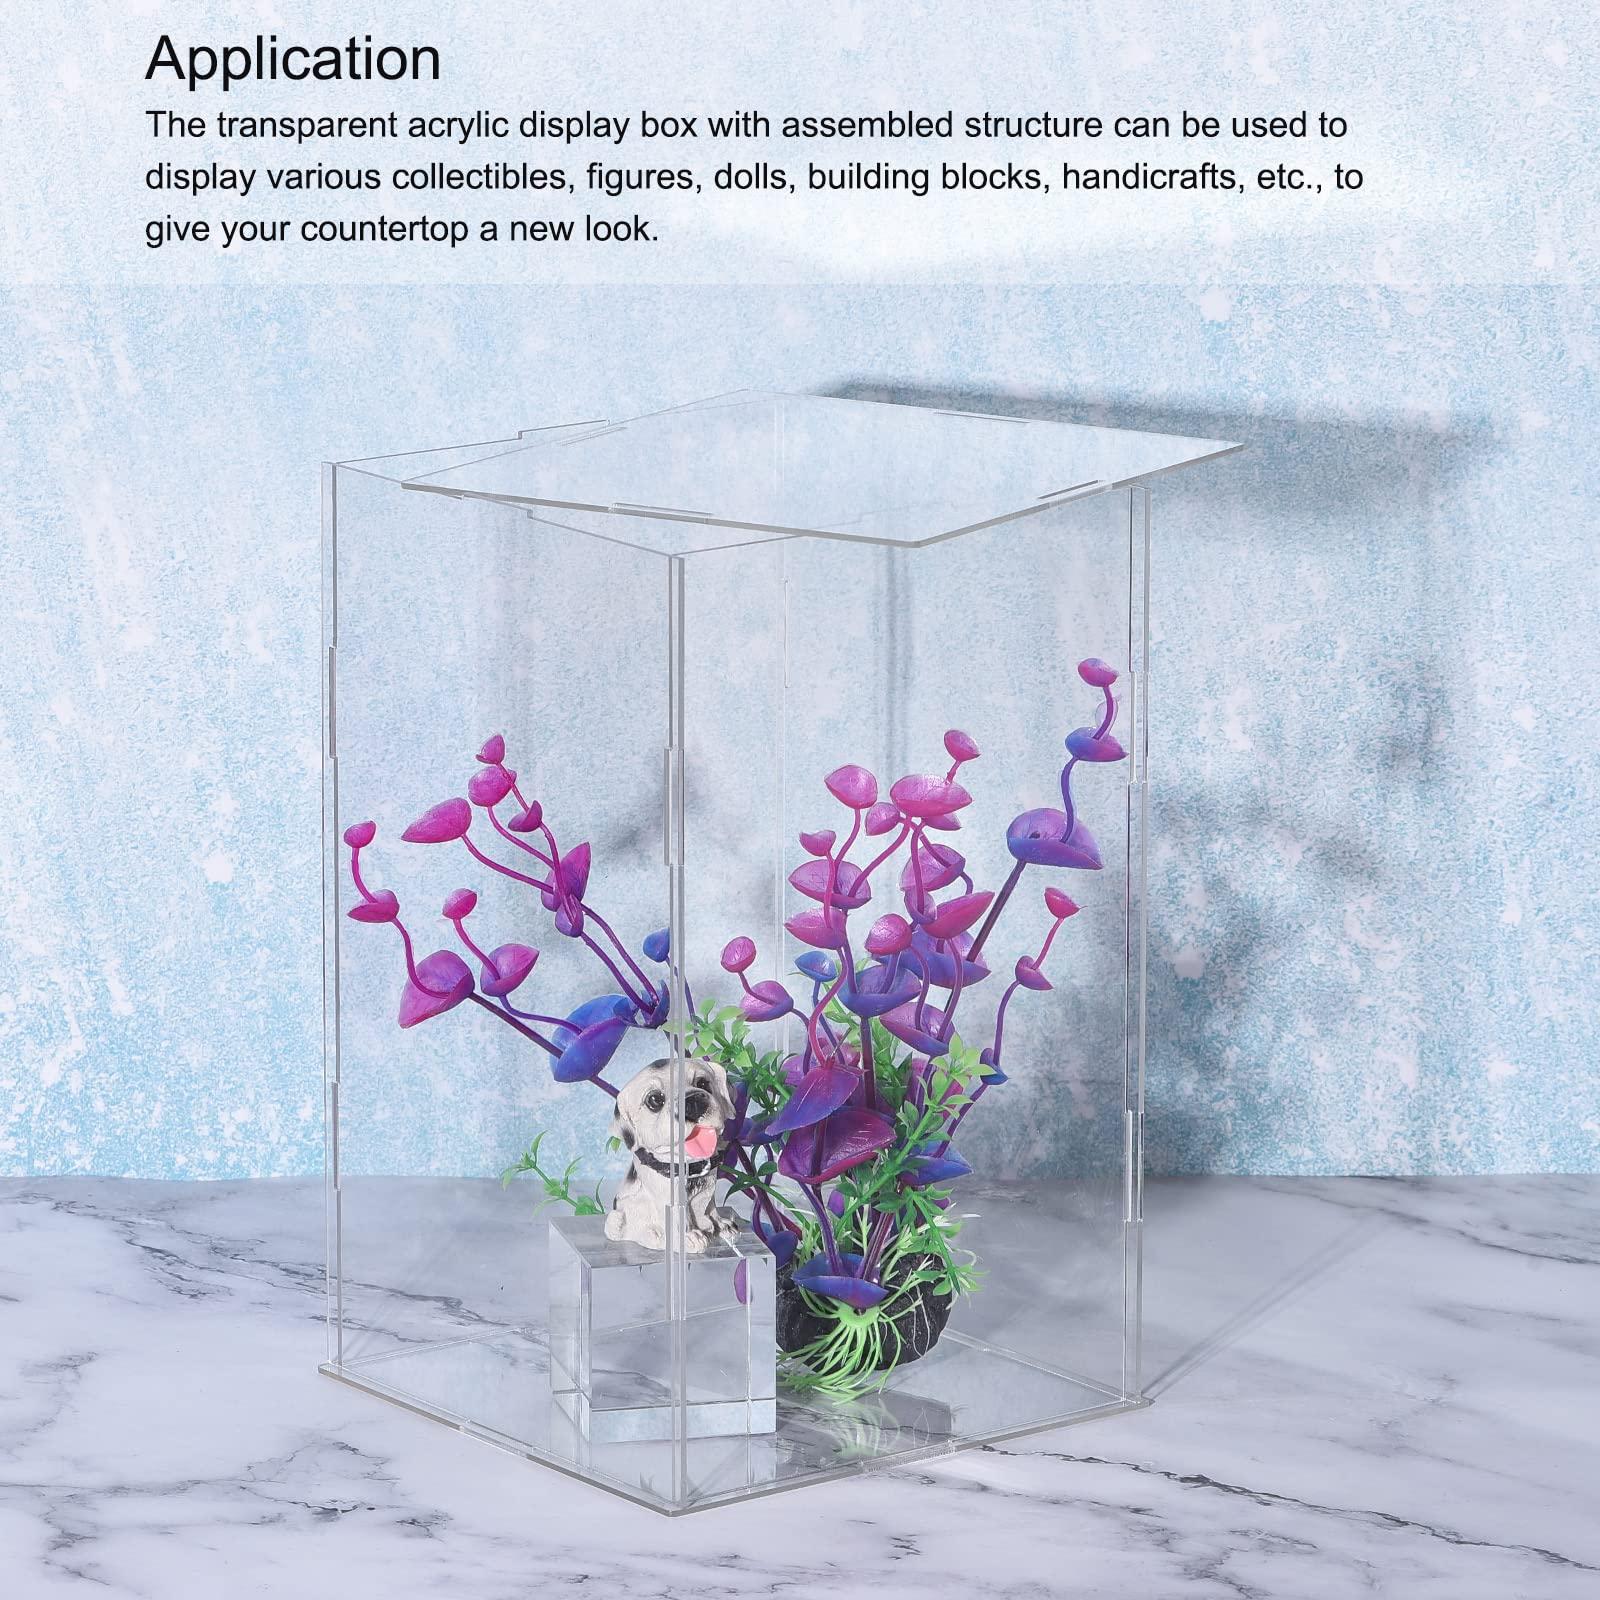 sourcing map Acrylic Display Case Plastic Box Clear Assemble Dustproof Showcase 31x16x15.5cm for Collectibles Items 4